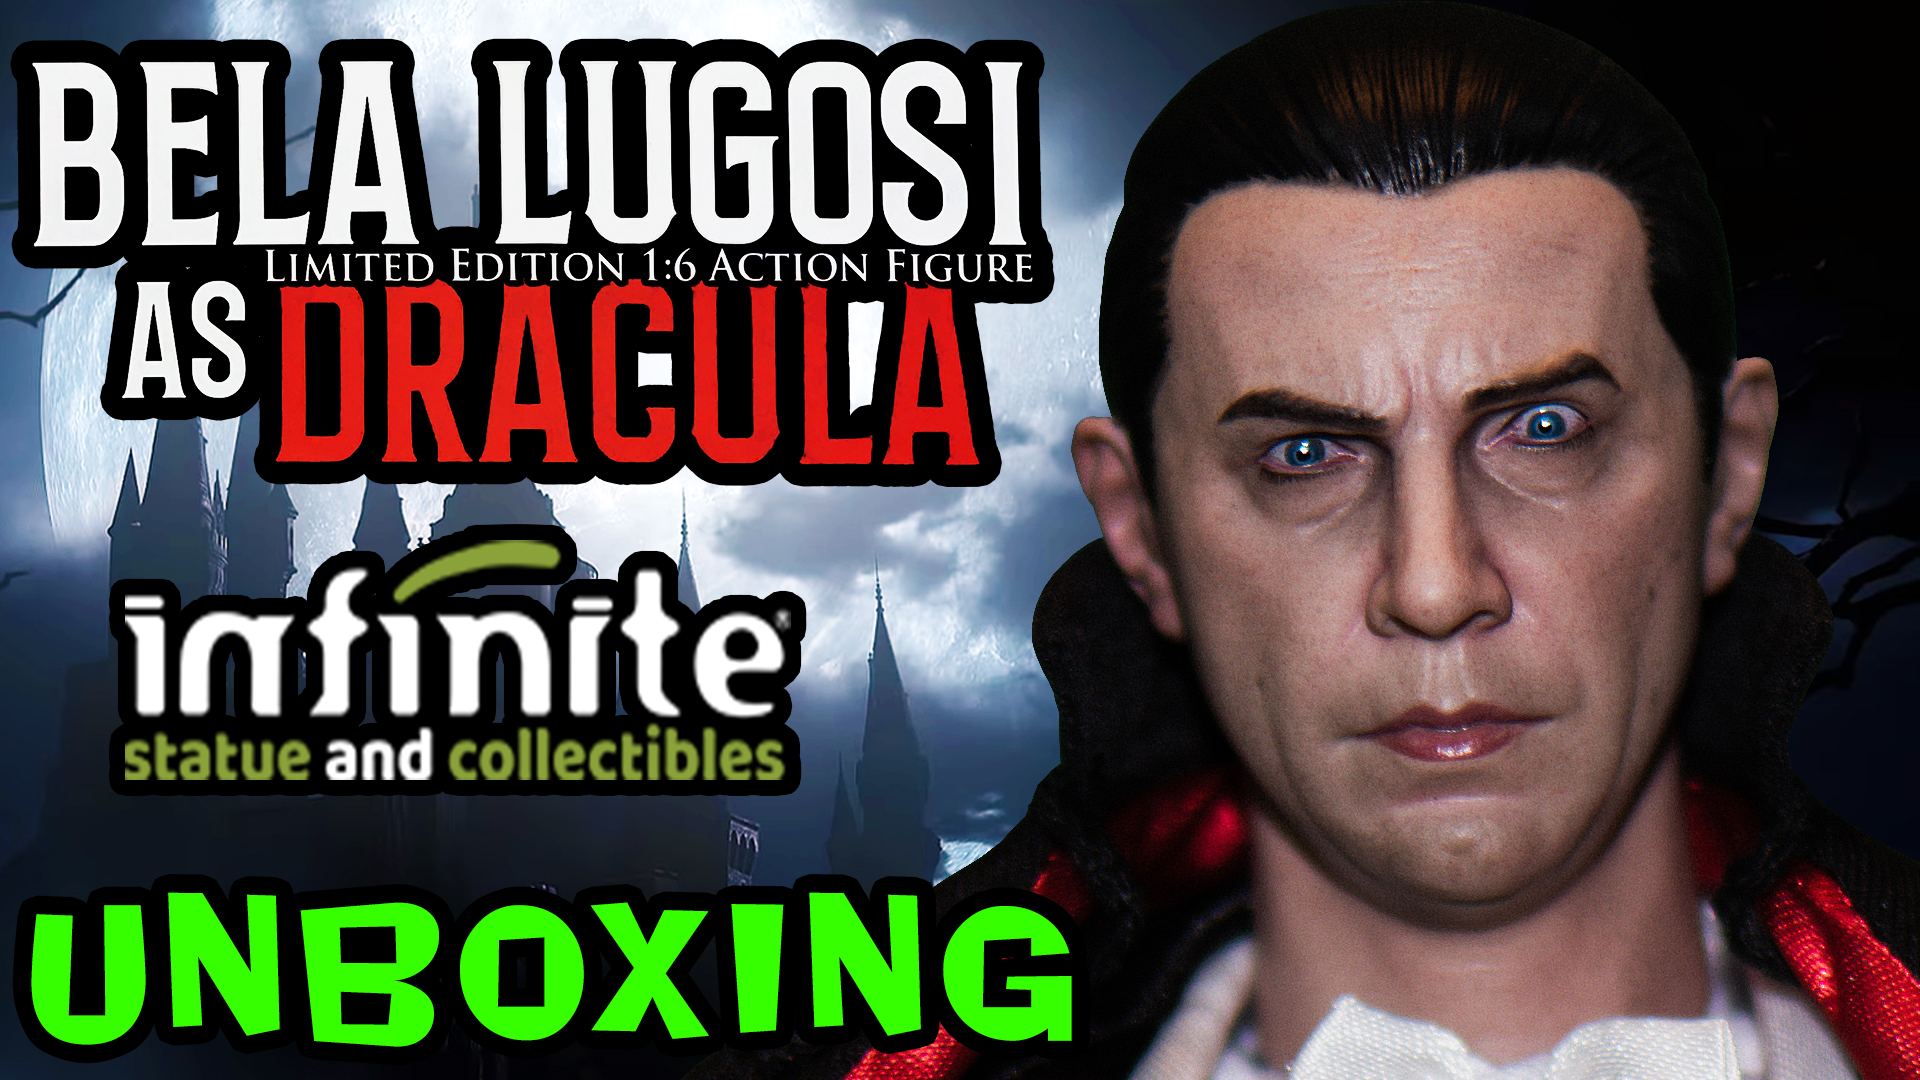 bela-lugosi-dracula-1-6-scale-figure-infinite-statue-unboxing-review-lord-kayoss